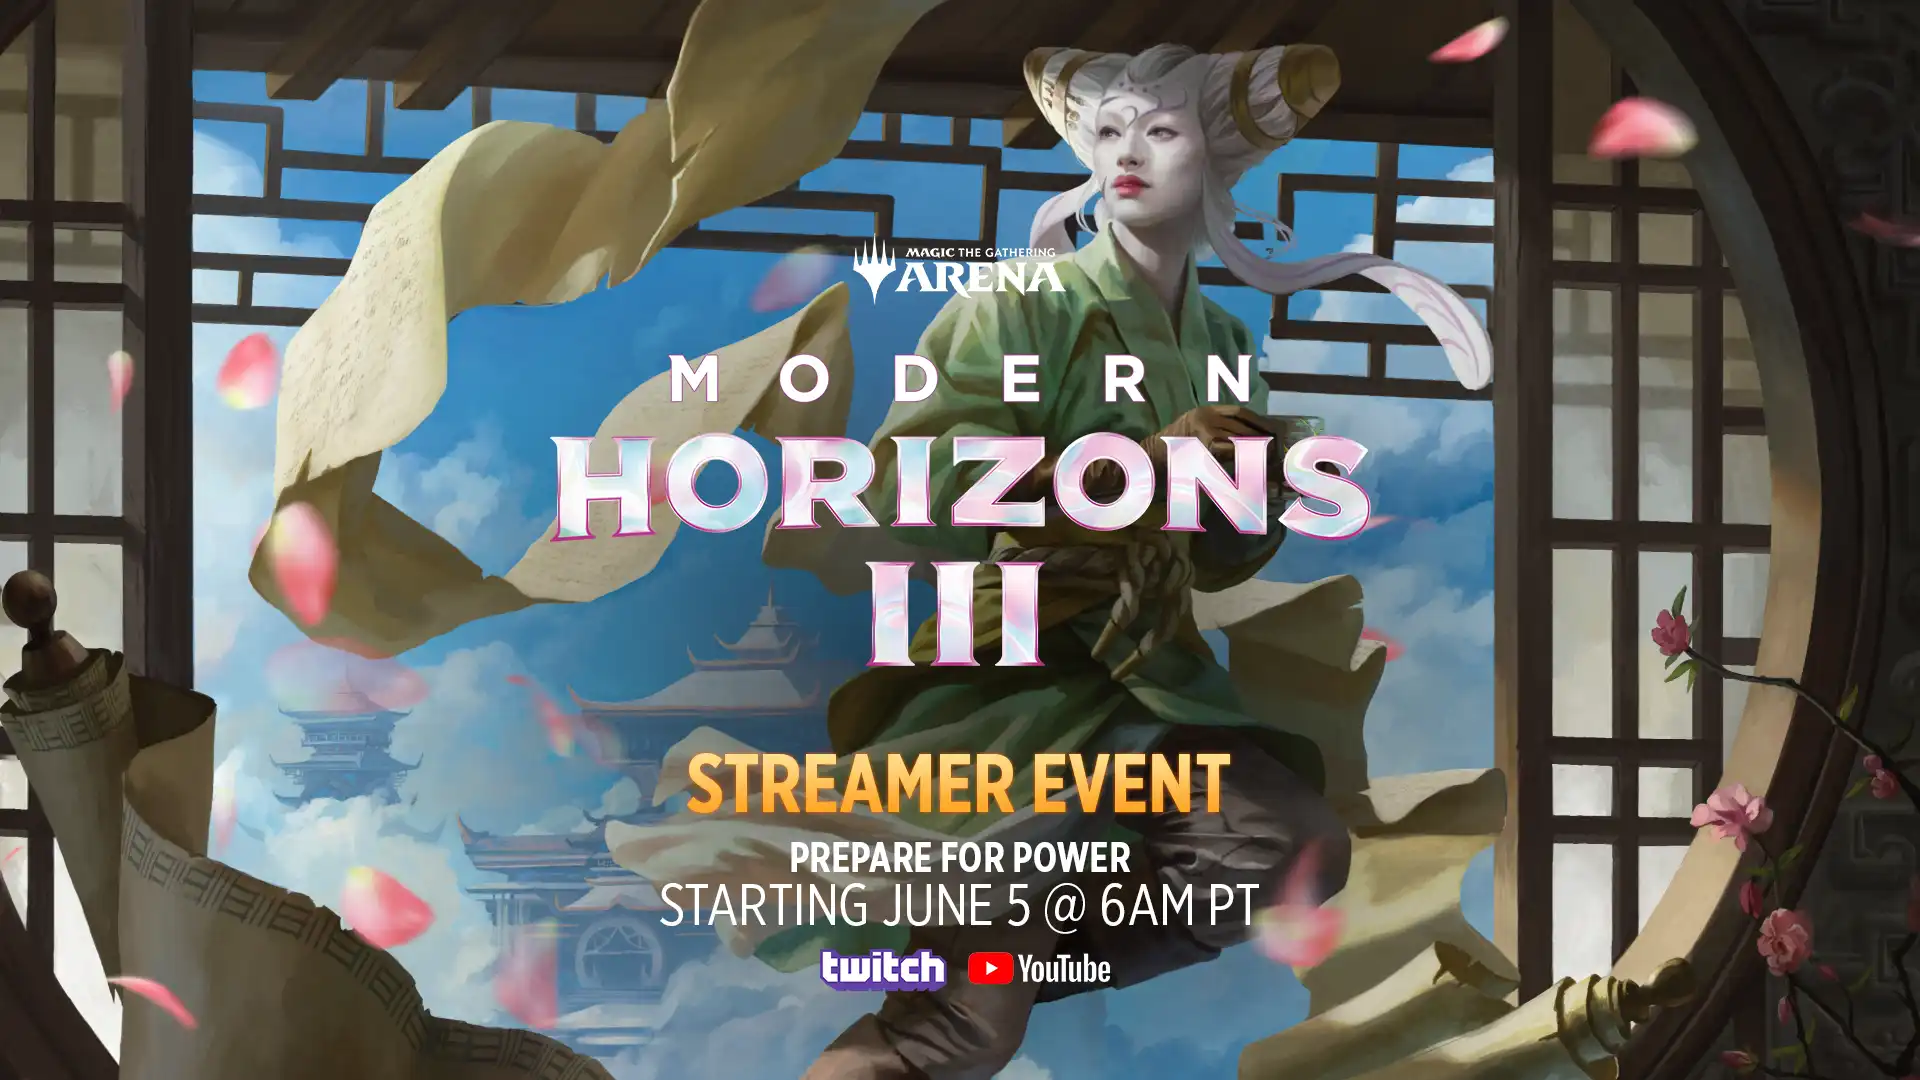 Artwork of Tamiyo floating through a window with scrolls unspooling and floating around her, with the text: Modern Horizons 3 Streamer Event starting June 5 at 6 a.m. PT on Twitch and YouTube